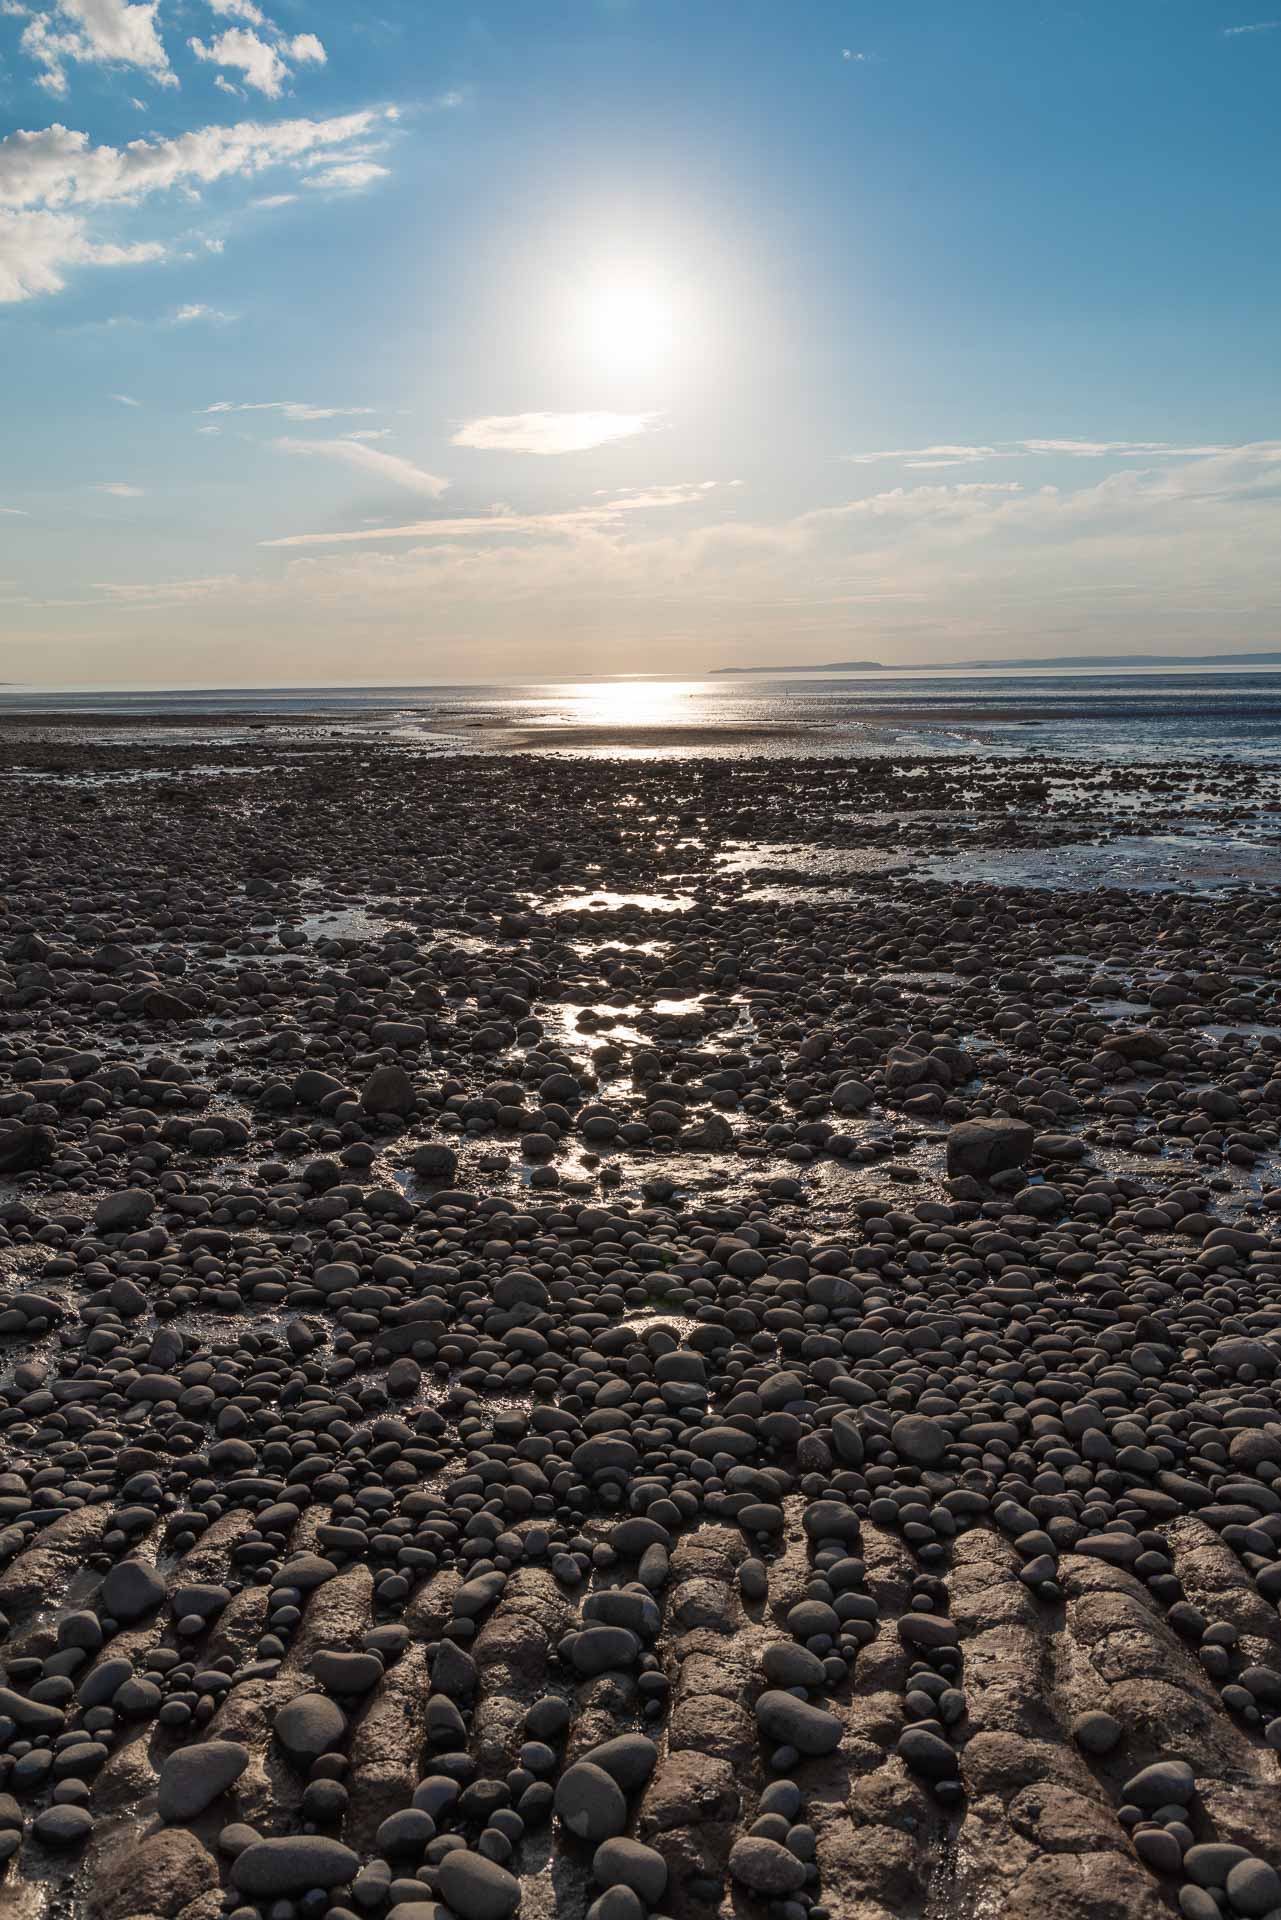 Scott's Bay Nova Scotia at low tide. looking toward the water. - FF, 1/1000, f 11, ISO 200, 28mm